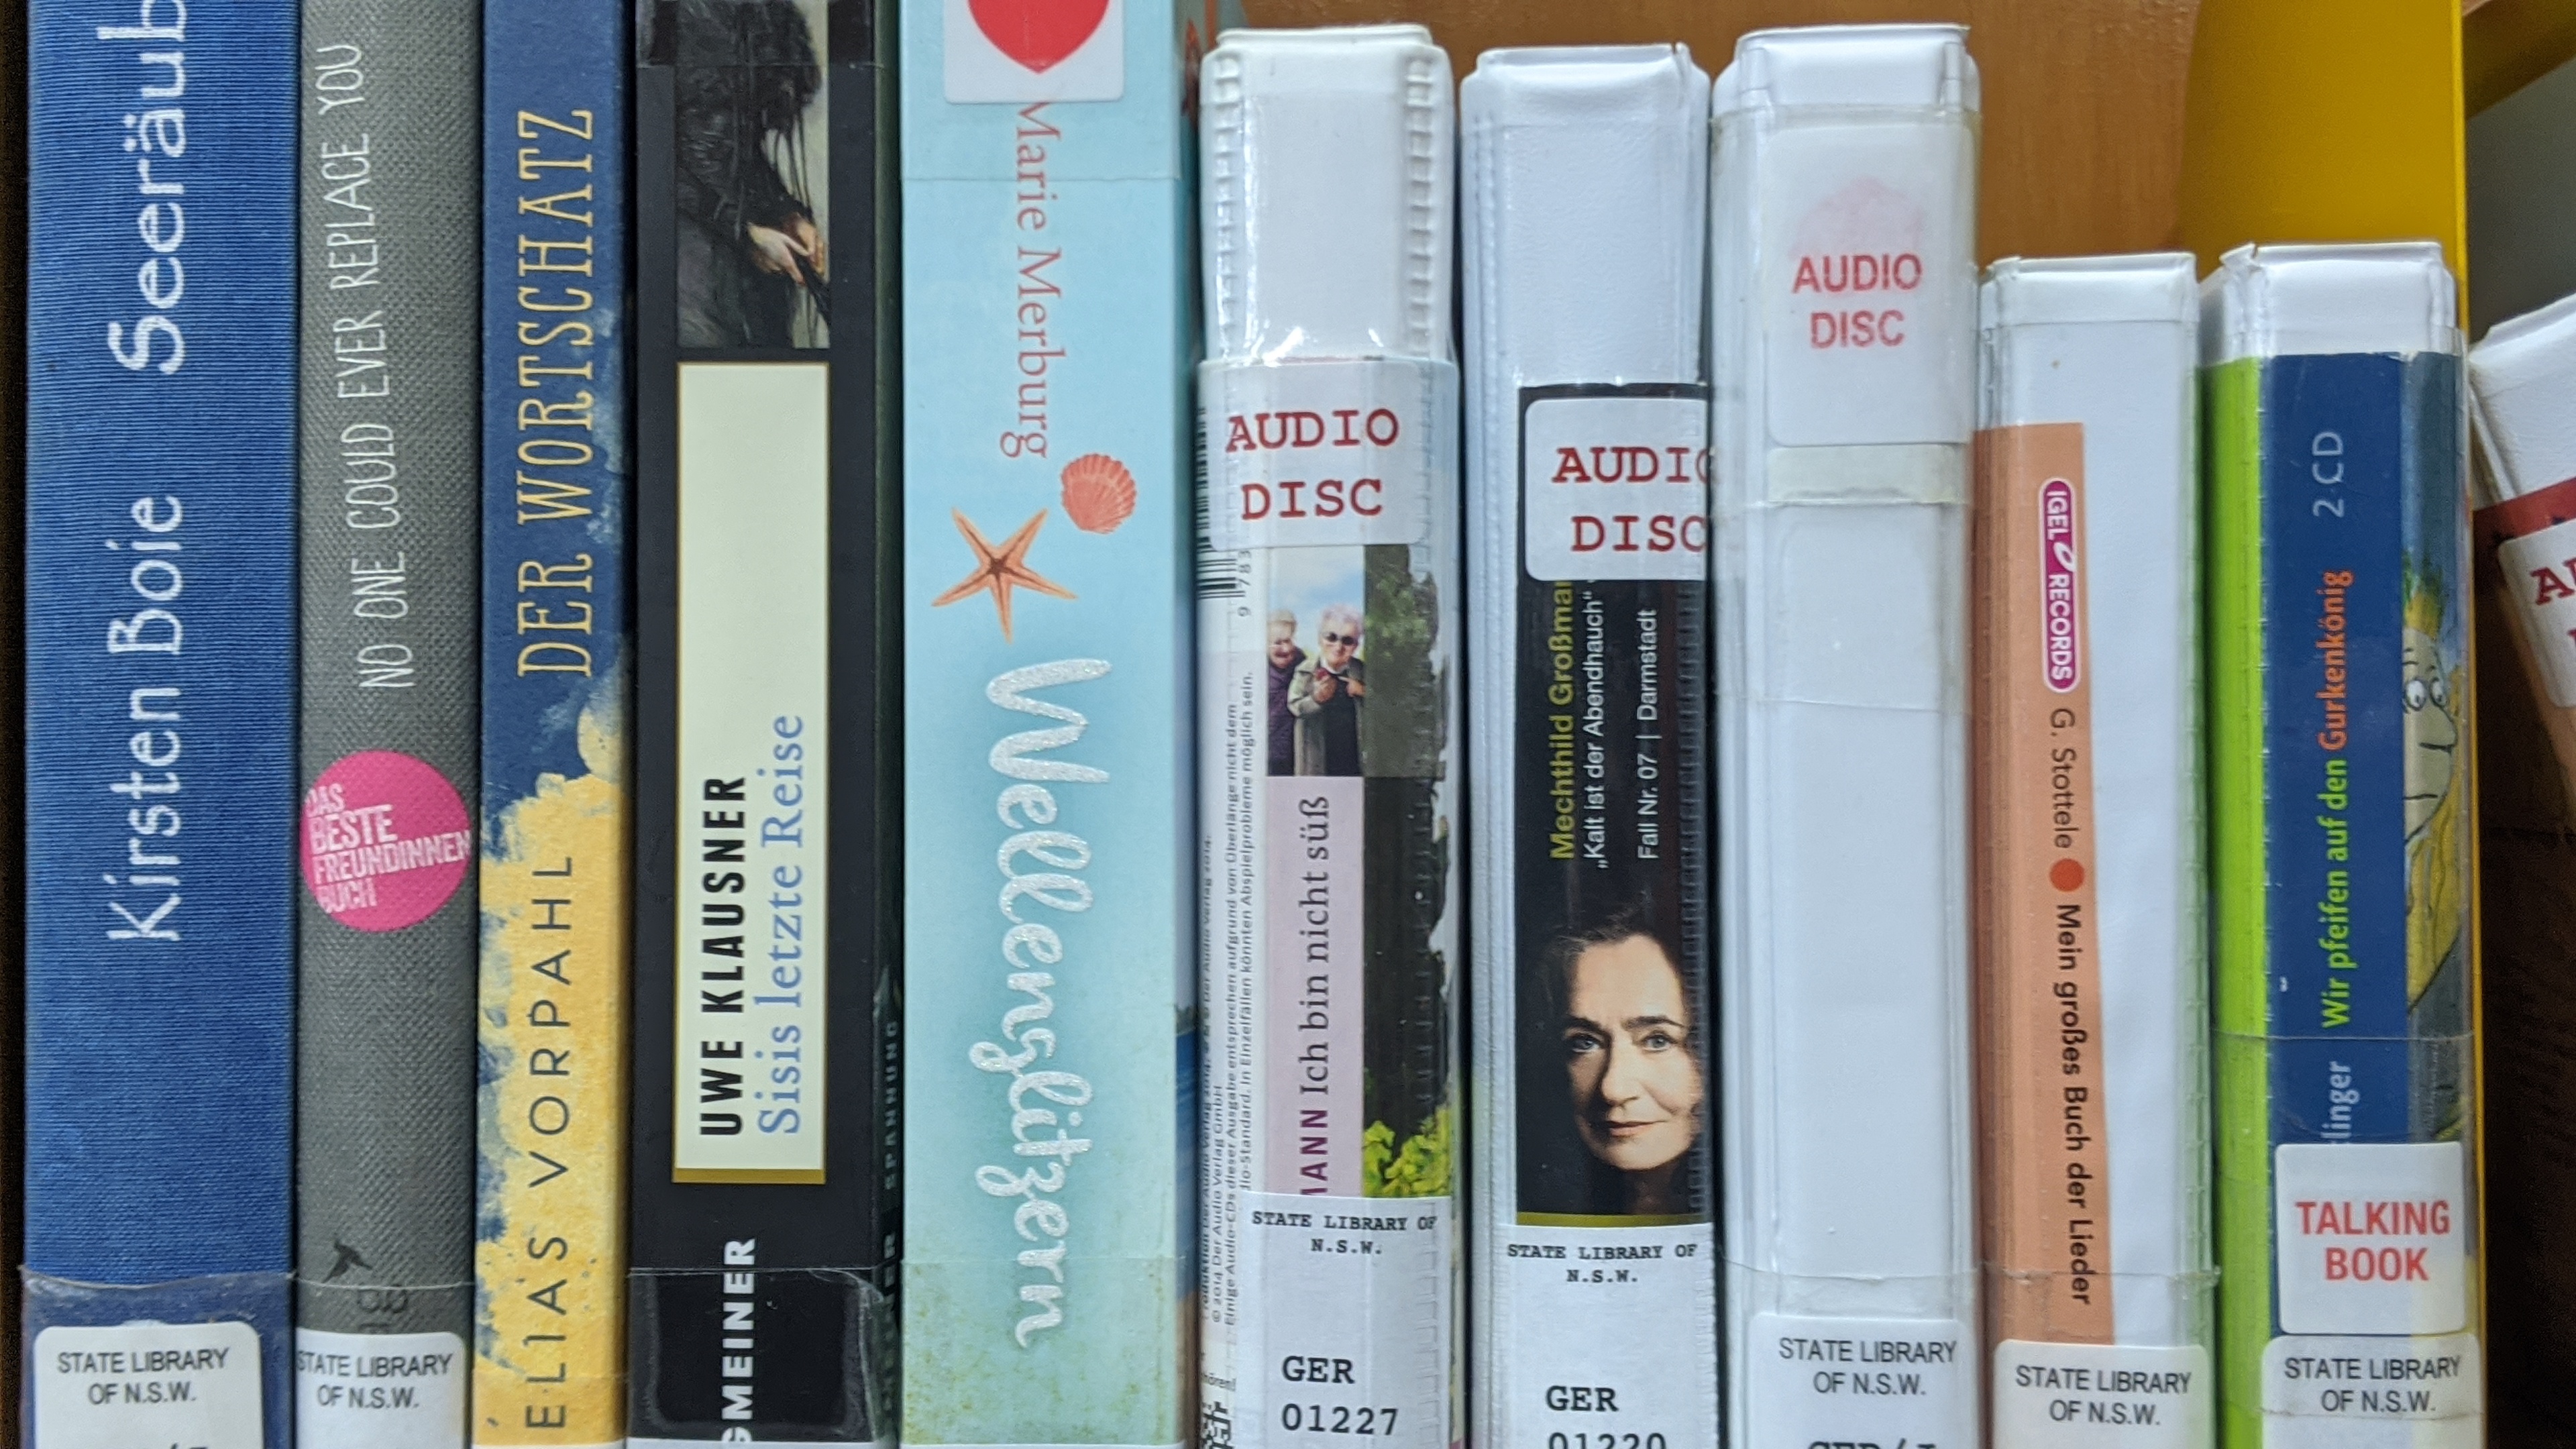 Photograph of the German language books on the shelf, spine view